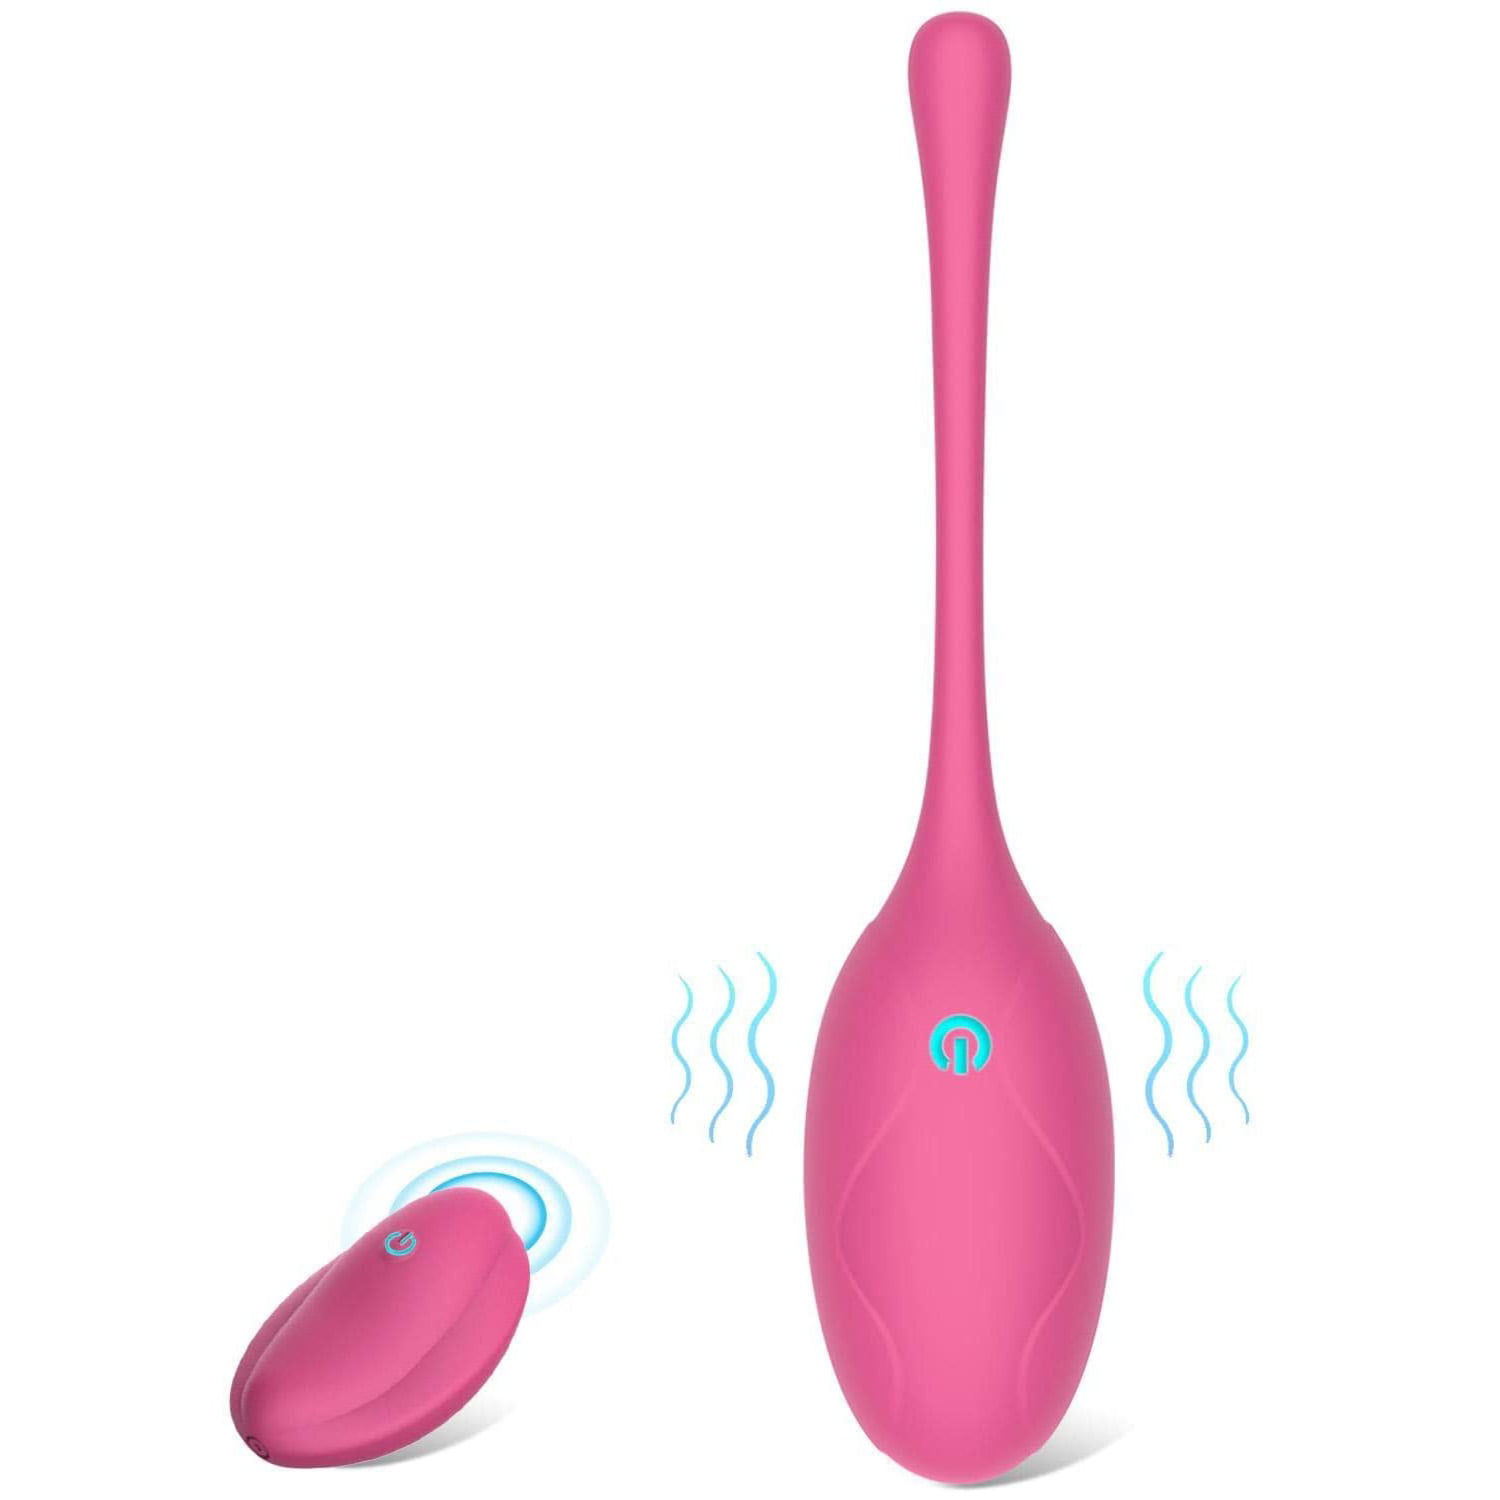 Vibrator Vibrating Eggs for Adult Women, Love Eggs for G-Spot Stimulation, Wireless Sex Toys for Couple with Remote Control